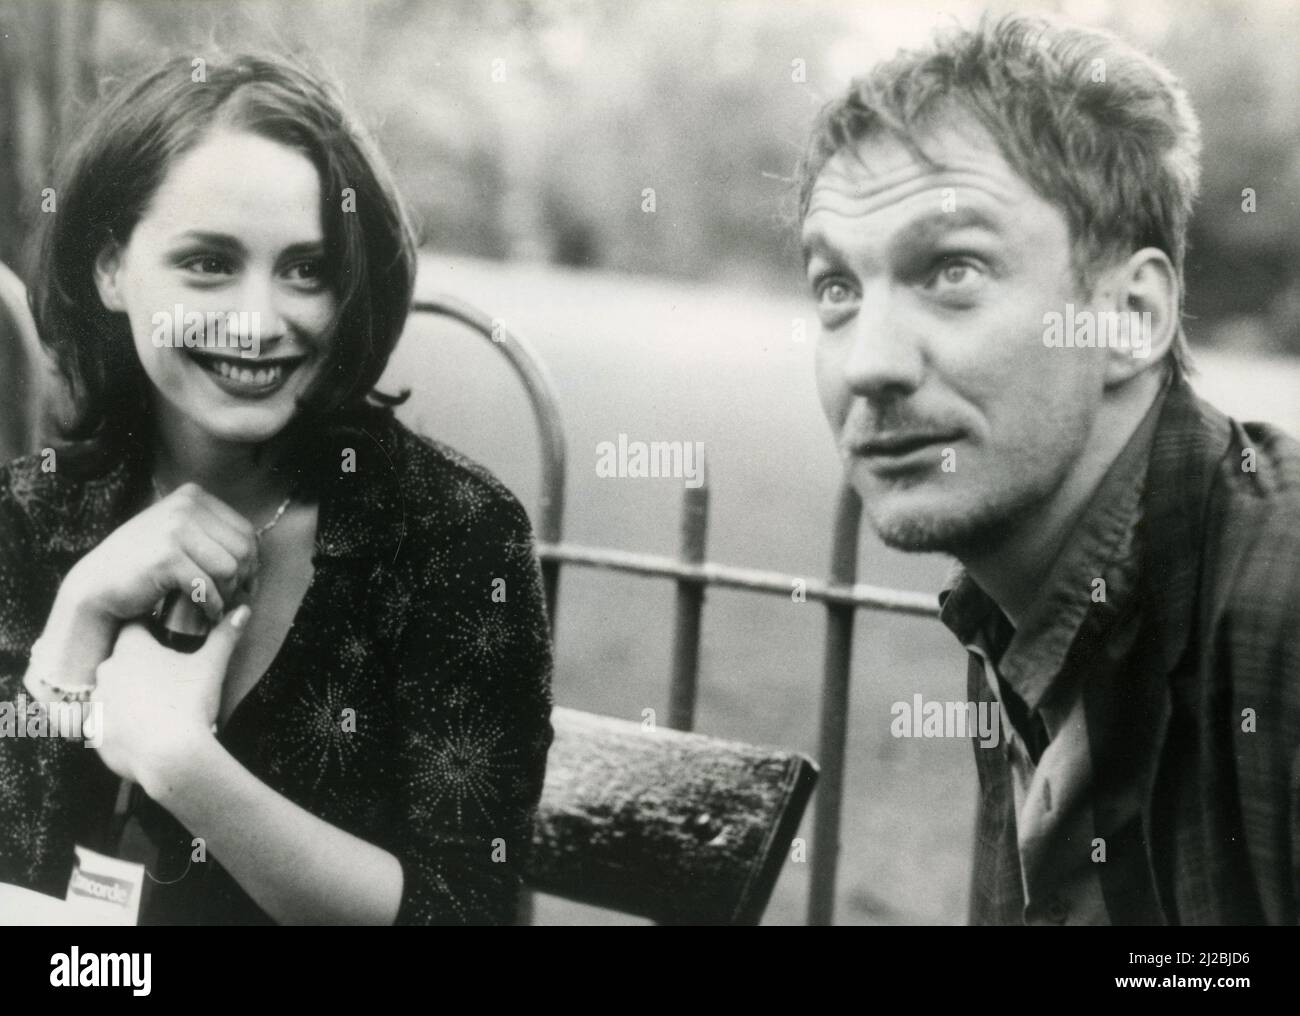 Scottish actress Laura Fraser and actor David Thewlis in the movie Divorcing Jack, 1998 Stock Photo